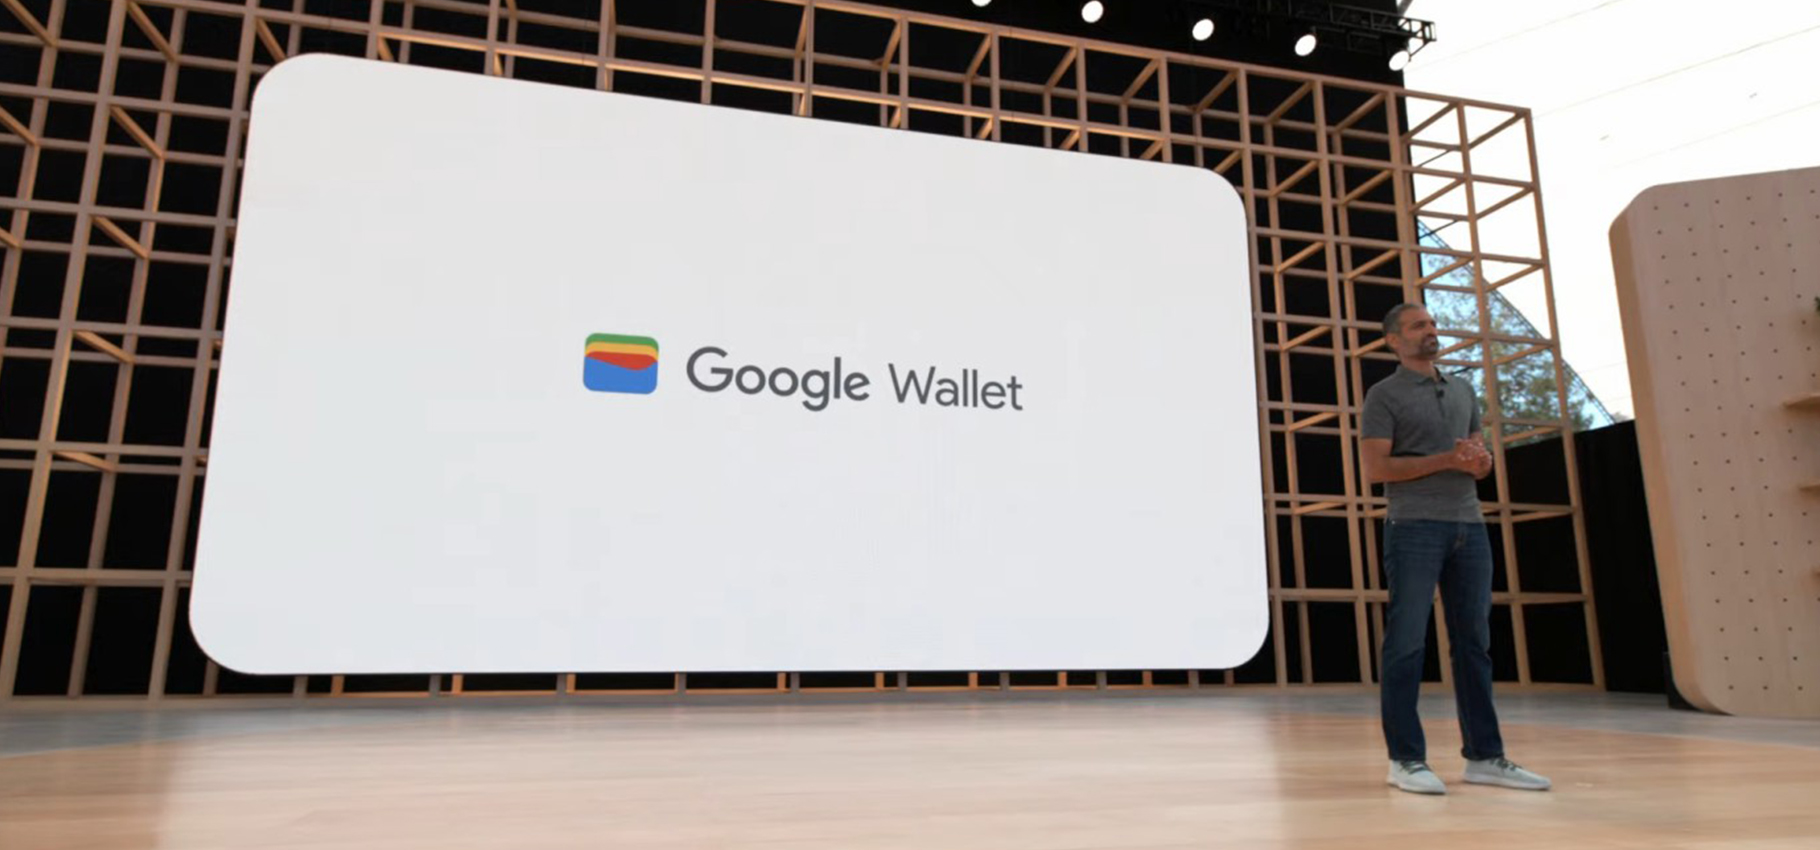 Google Wallet enters South Africa to tap digital payments growth